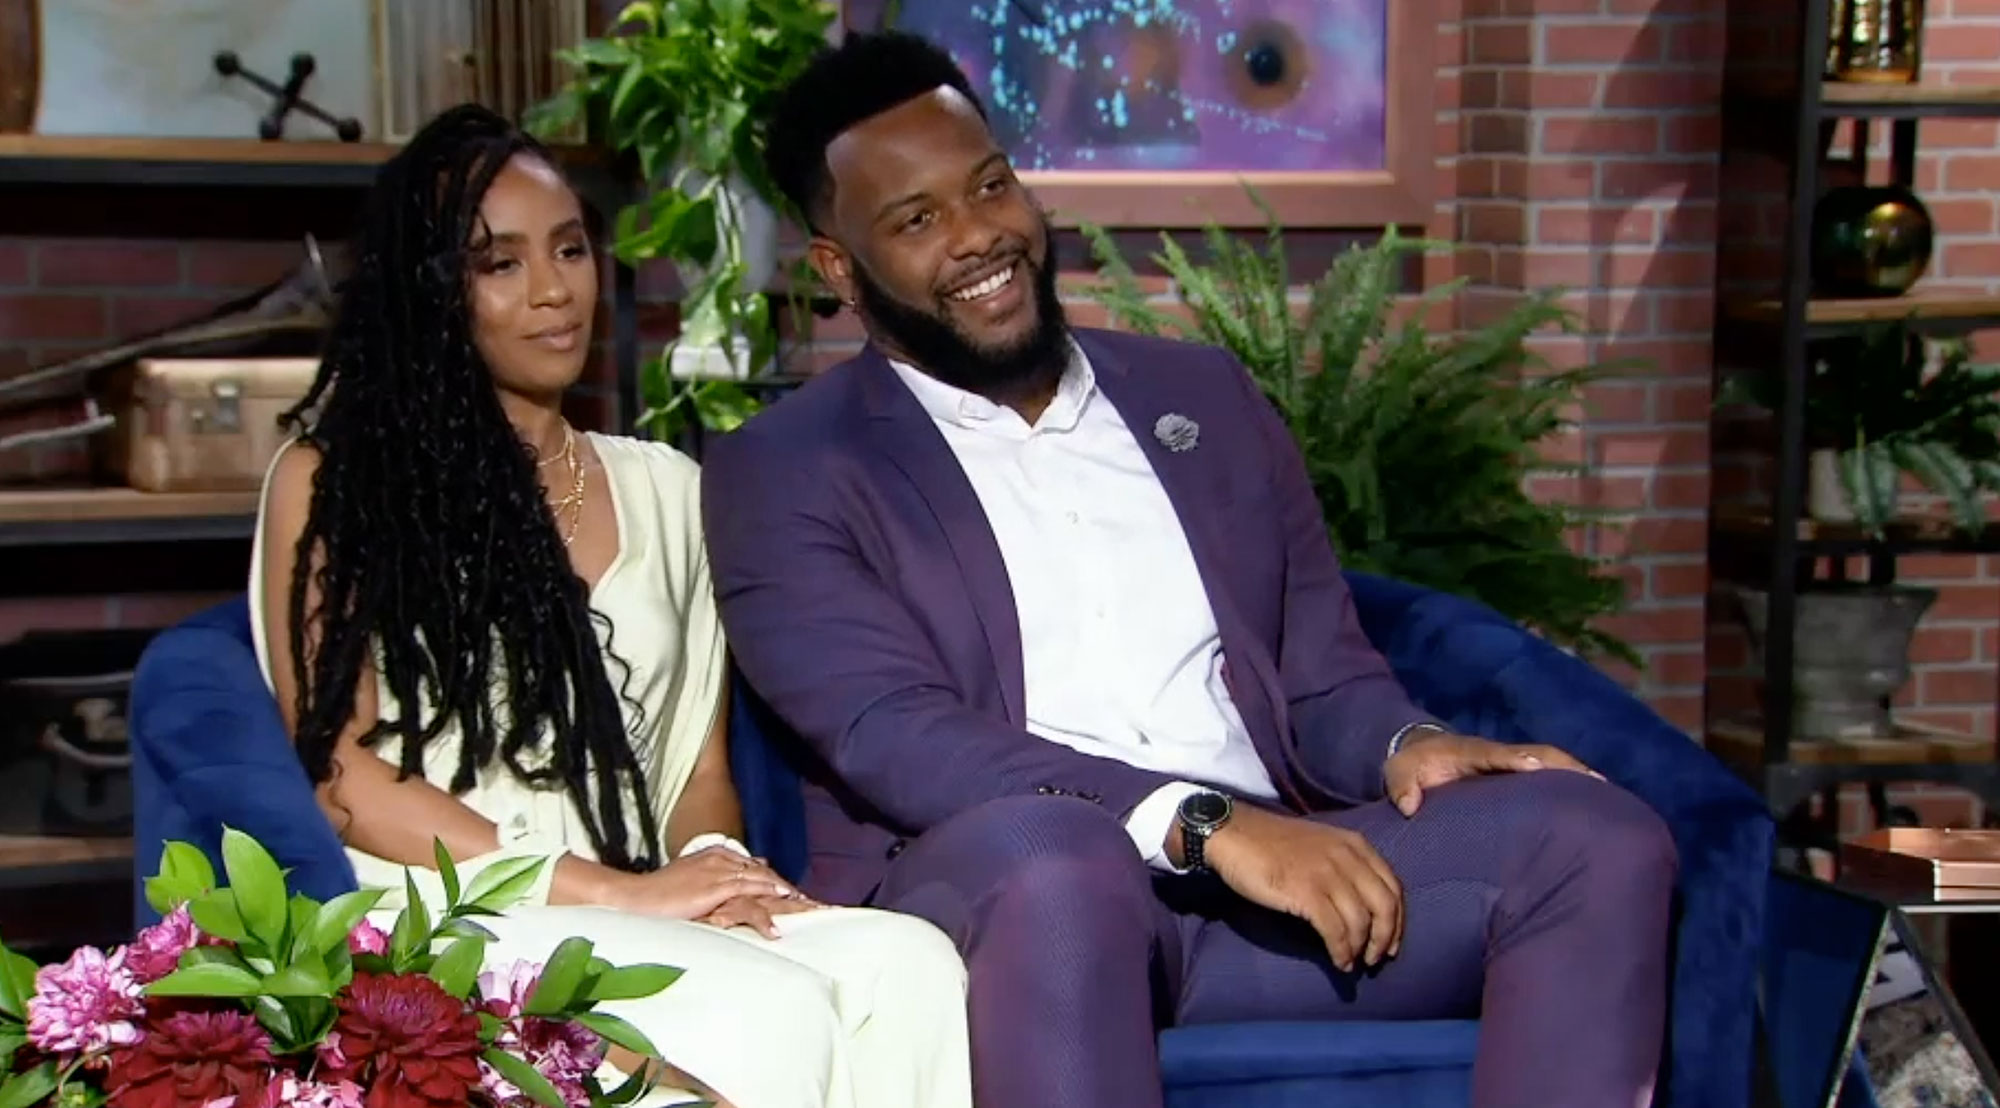 Are ‘Married At First Sight’ Karen And Miles Still Together?